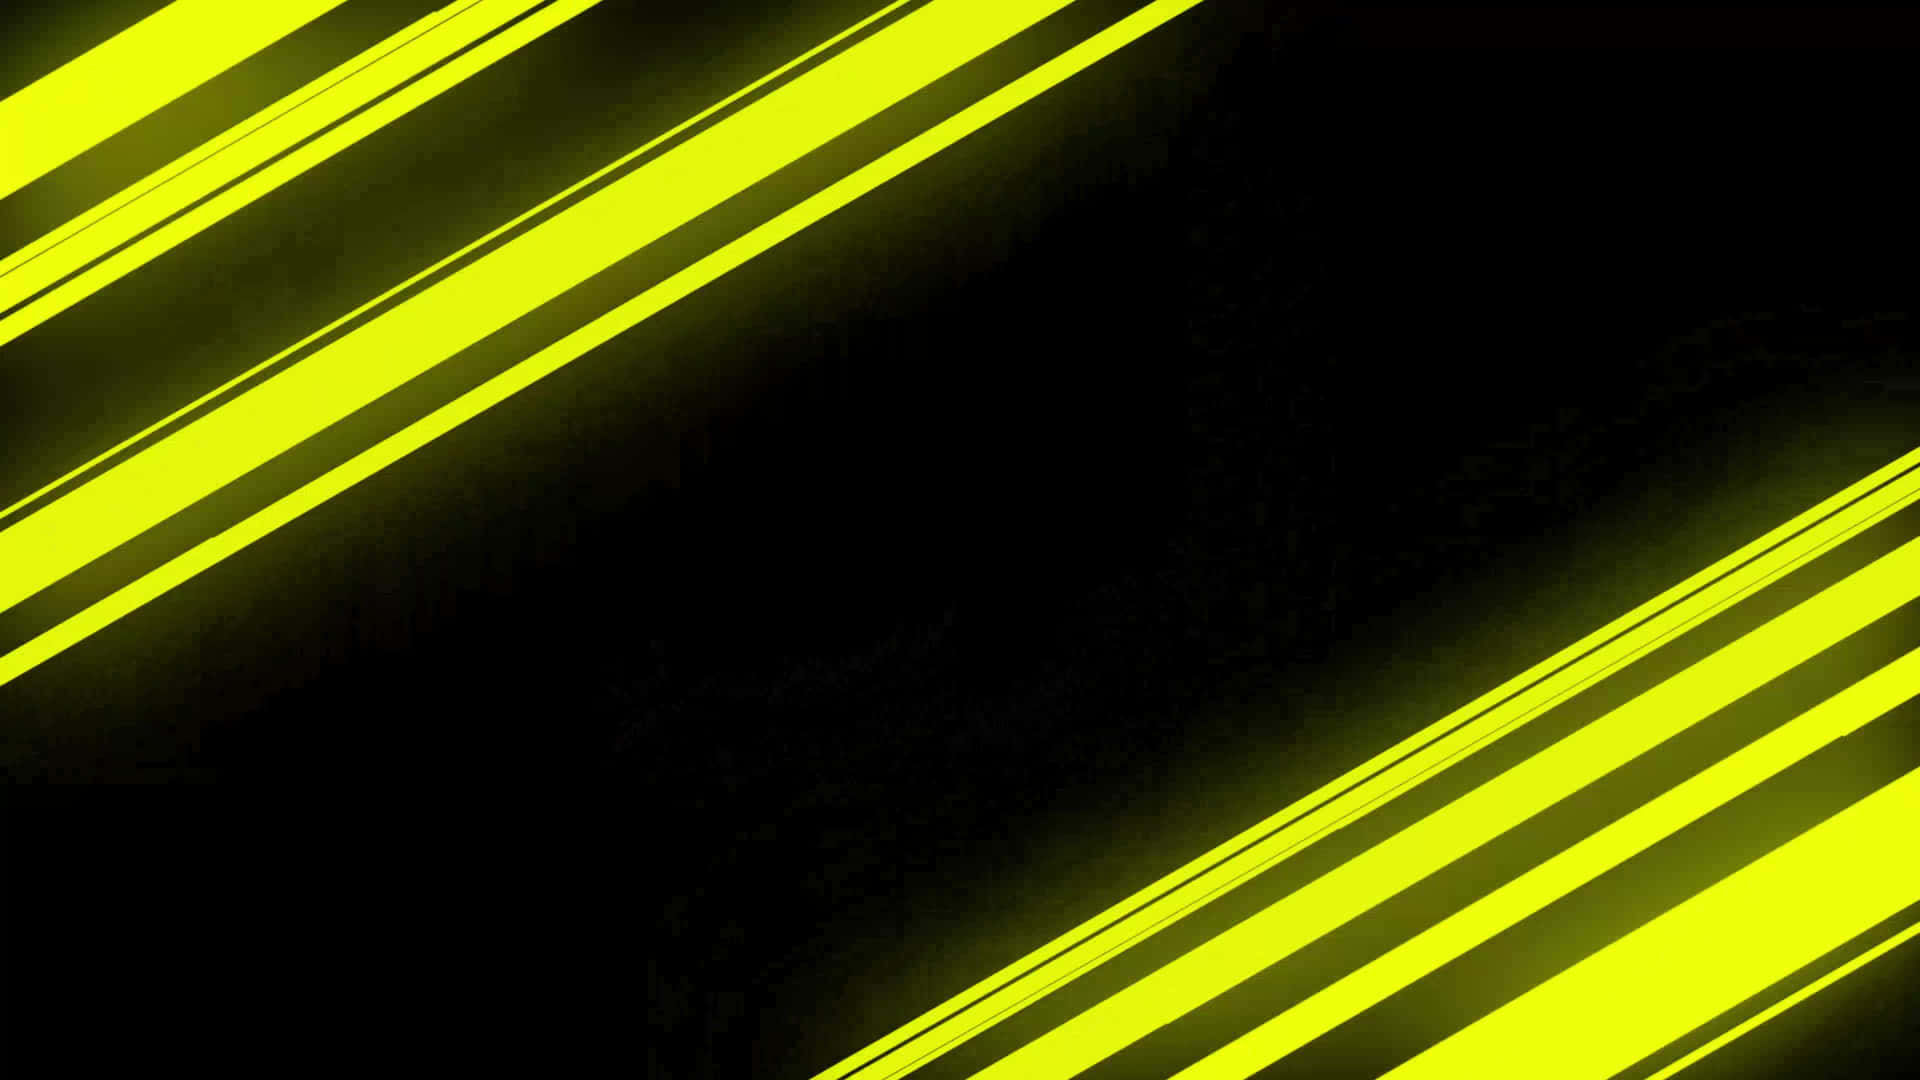 Neon Yellow Stripes On A Black Background Wallpaper